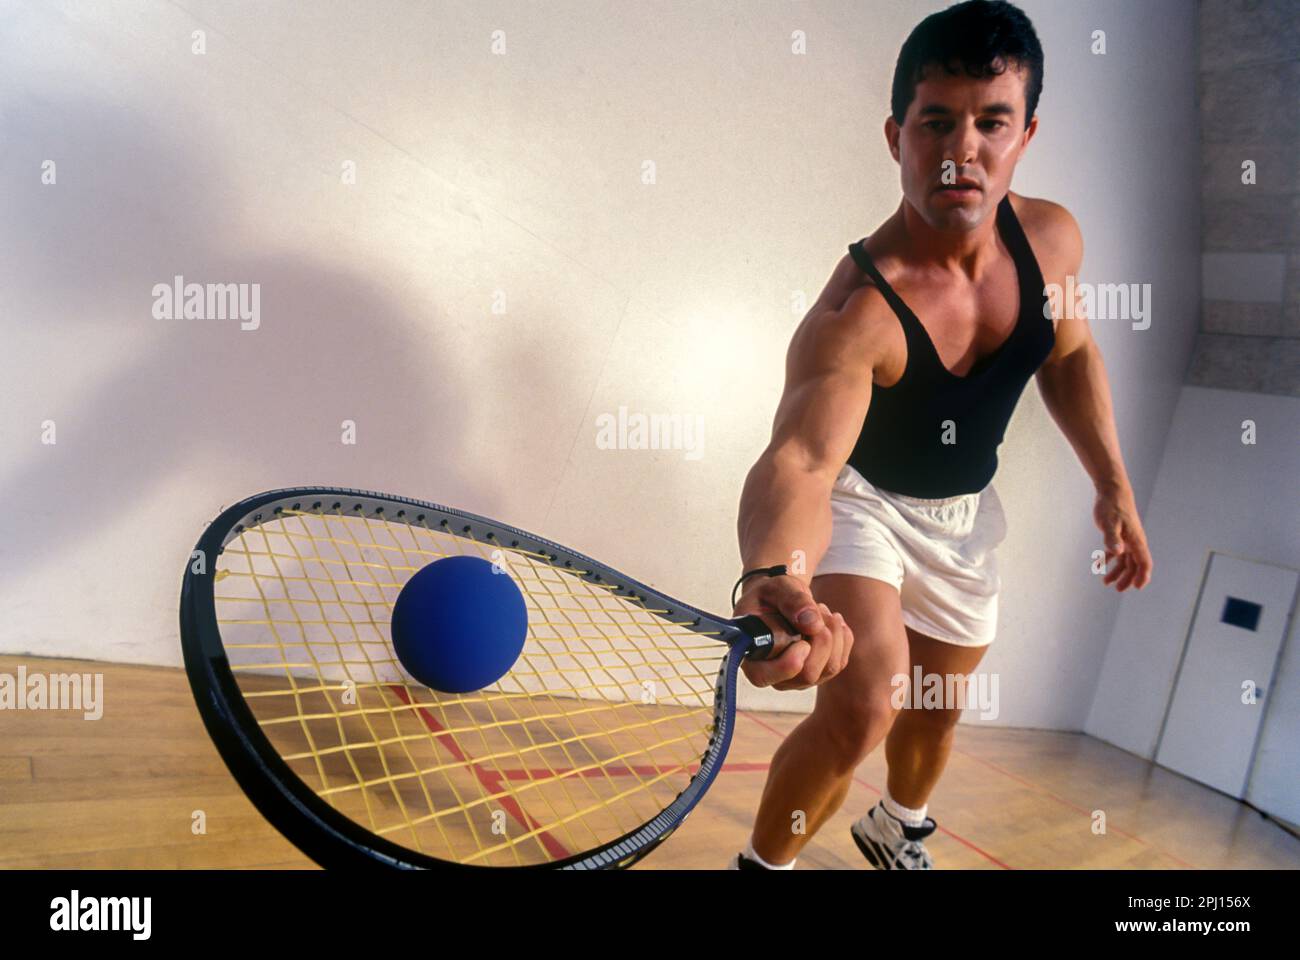 YOUNG MALE RACQUETBALL PLAYER HITTING BALL ON RACQUETBALL COURT Stock Photo